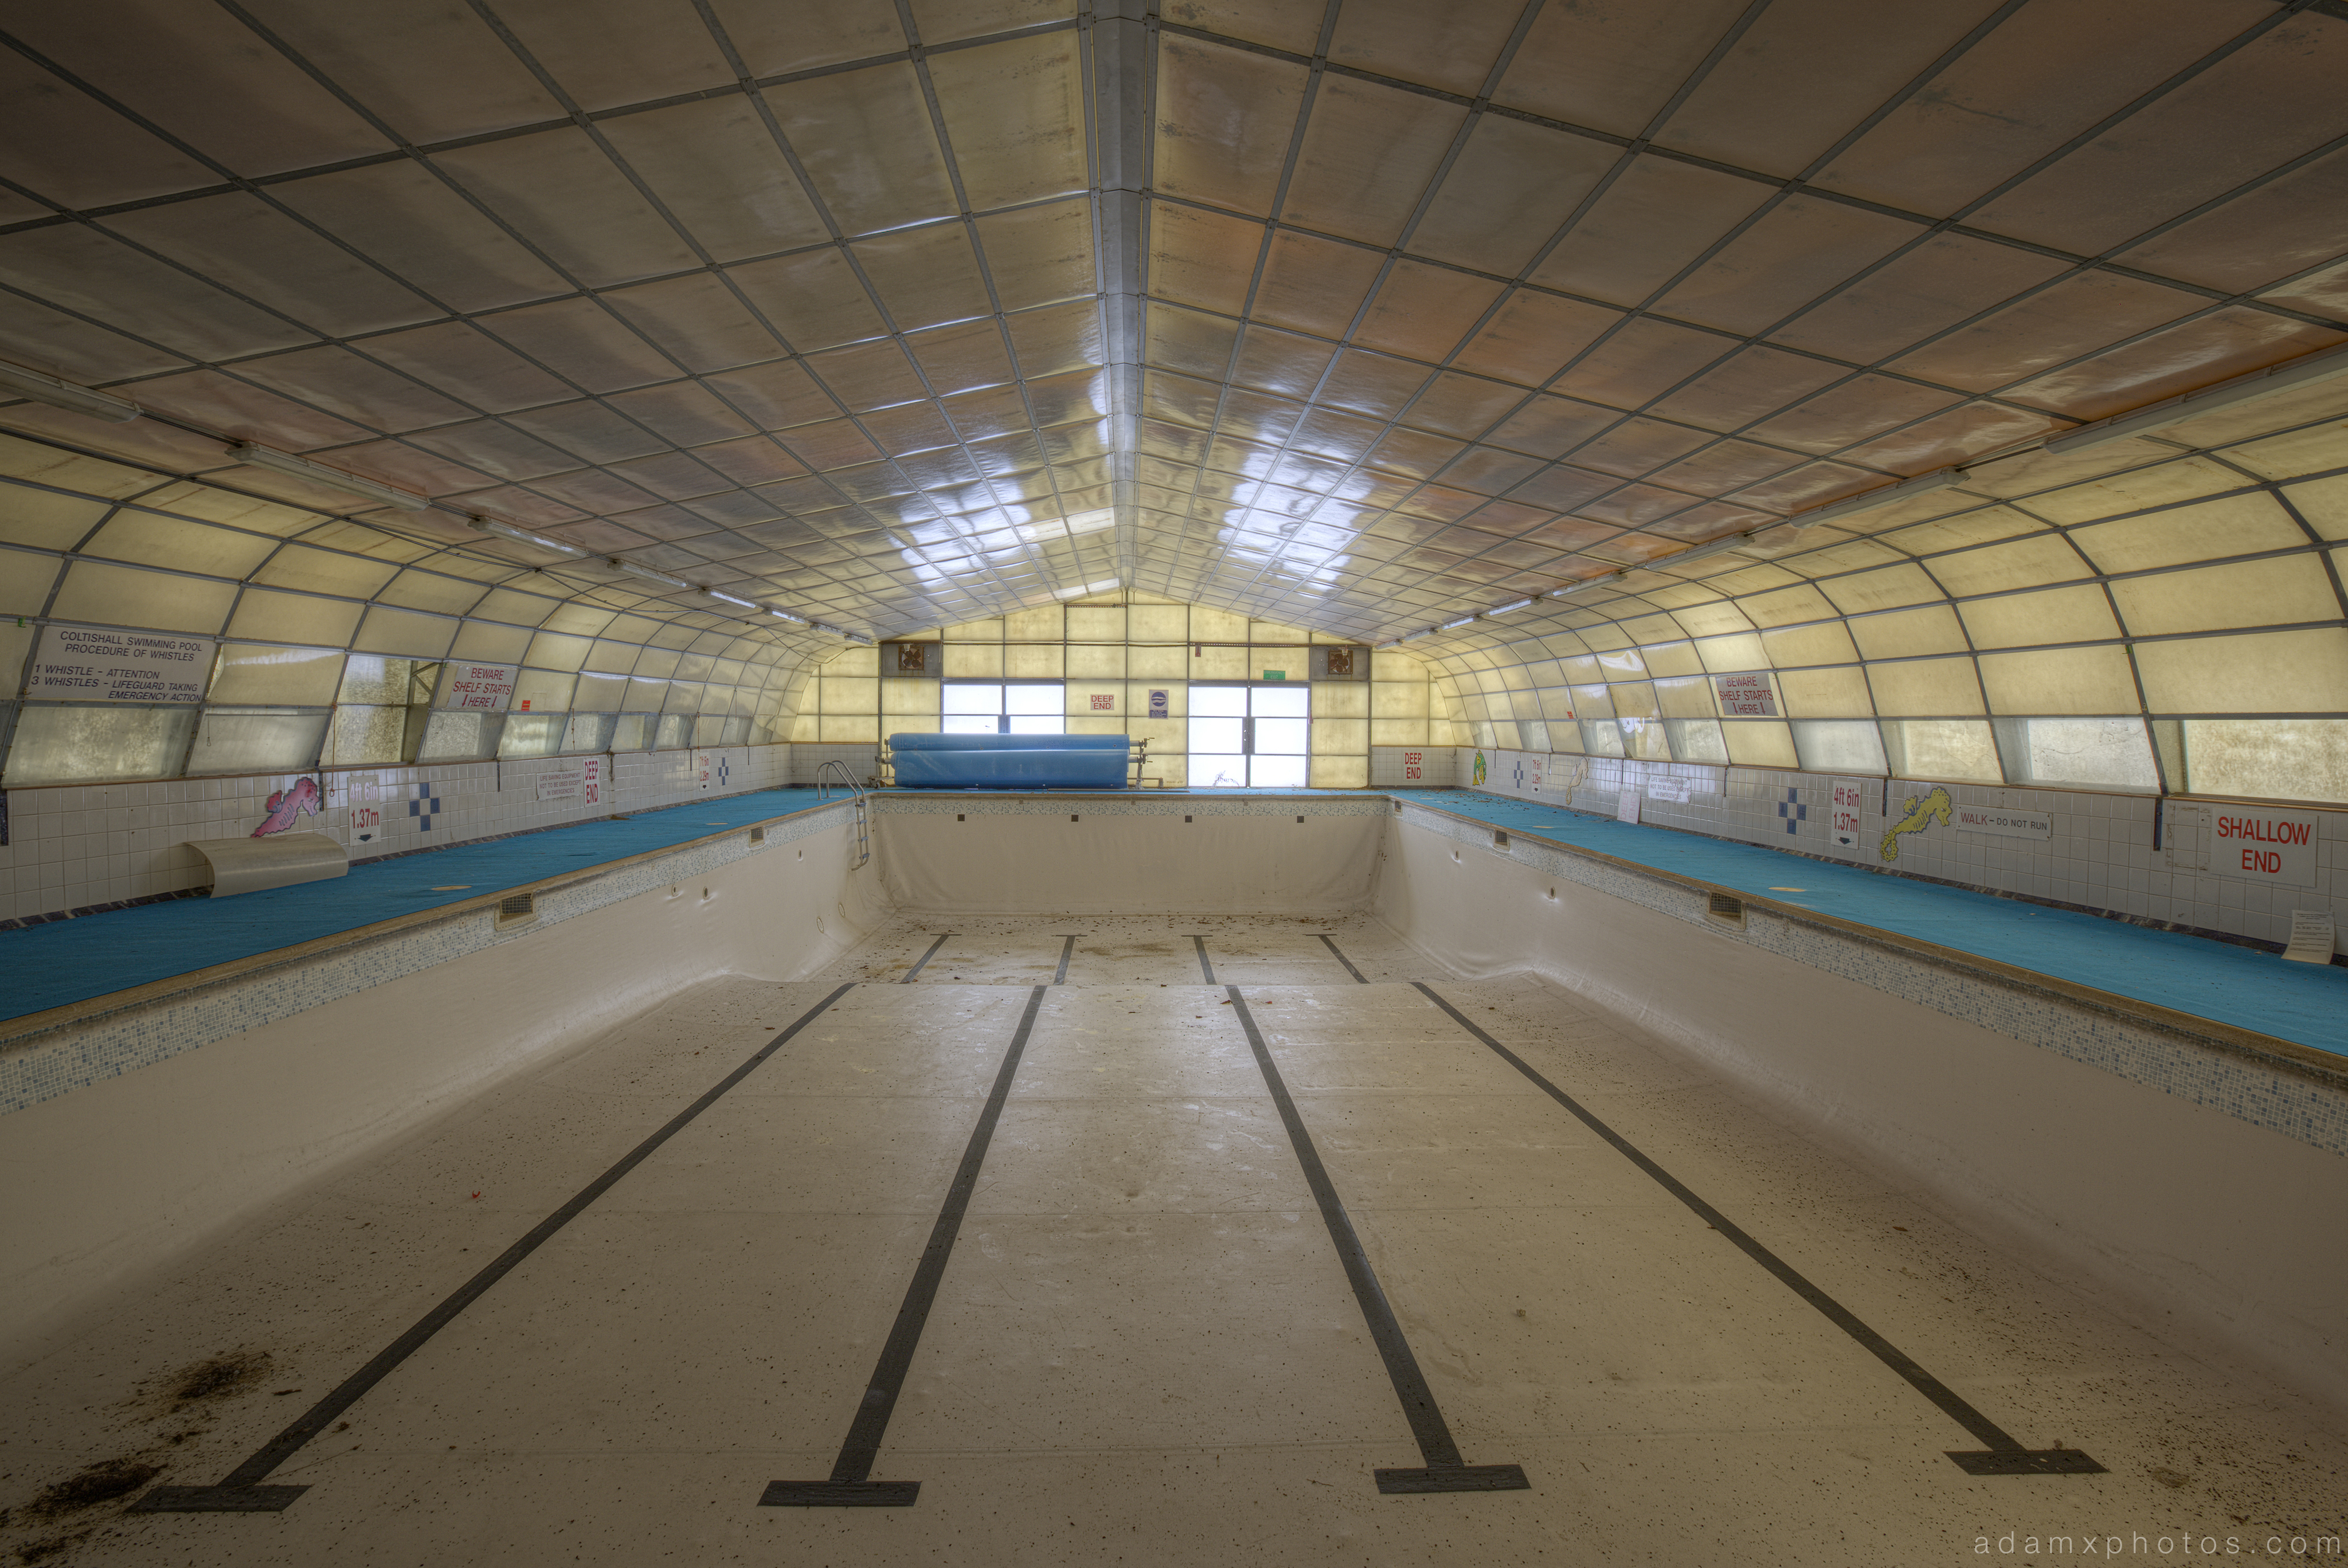 Swimming pool RAF Coltishall urbex urban exploration Adam X photos photographs photography report abandoned disused derelict forgotten decay decaying history